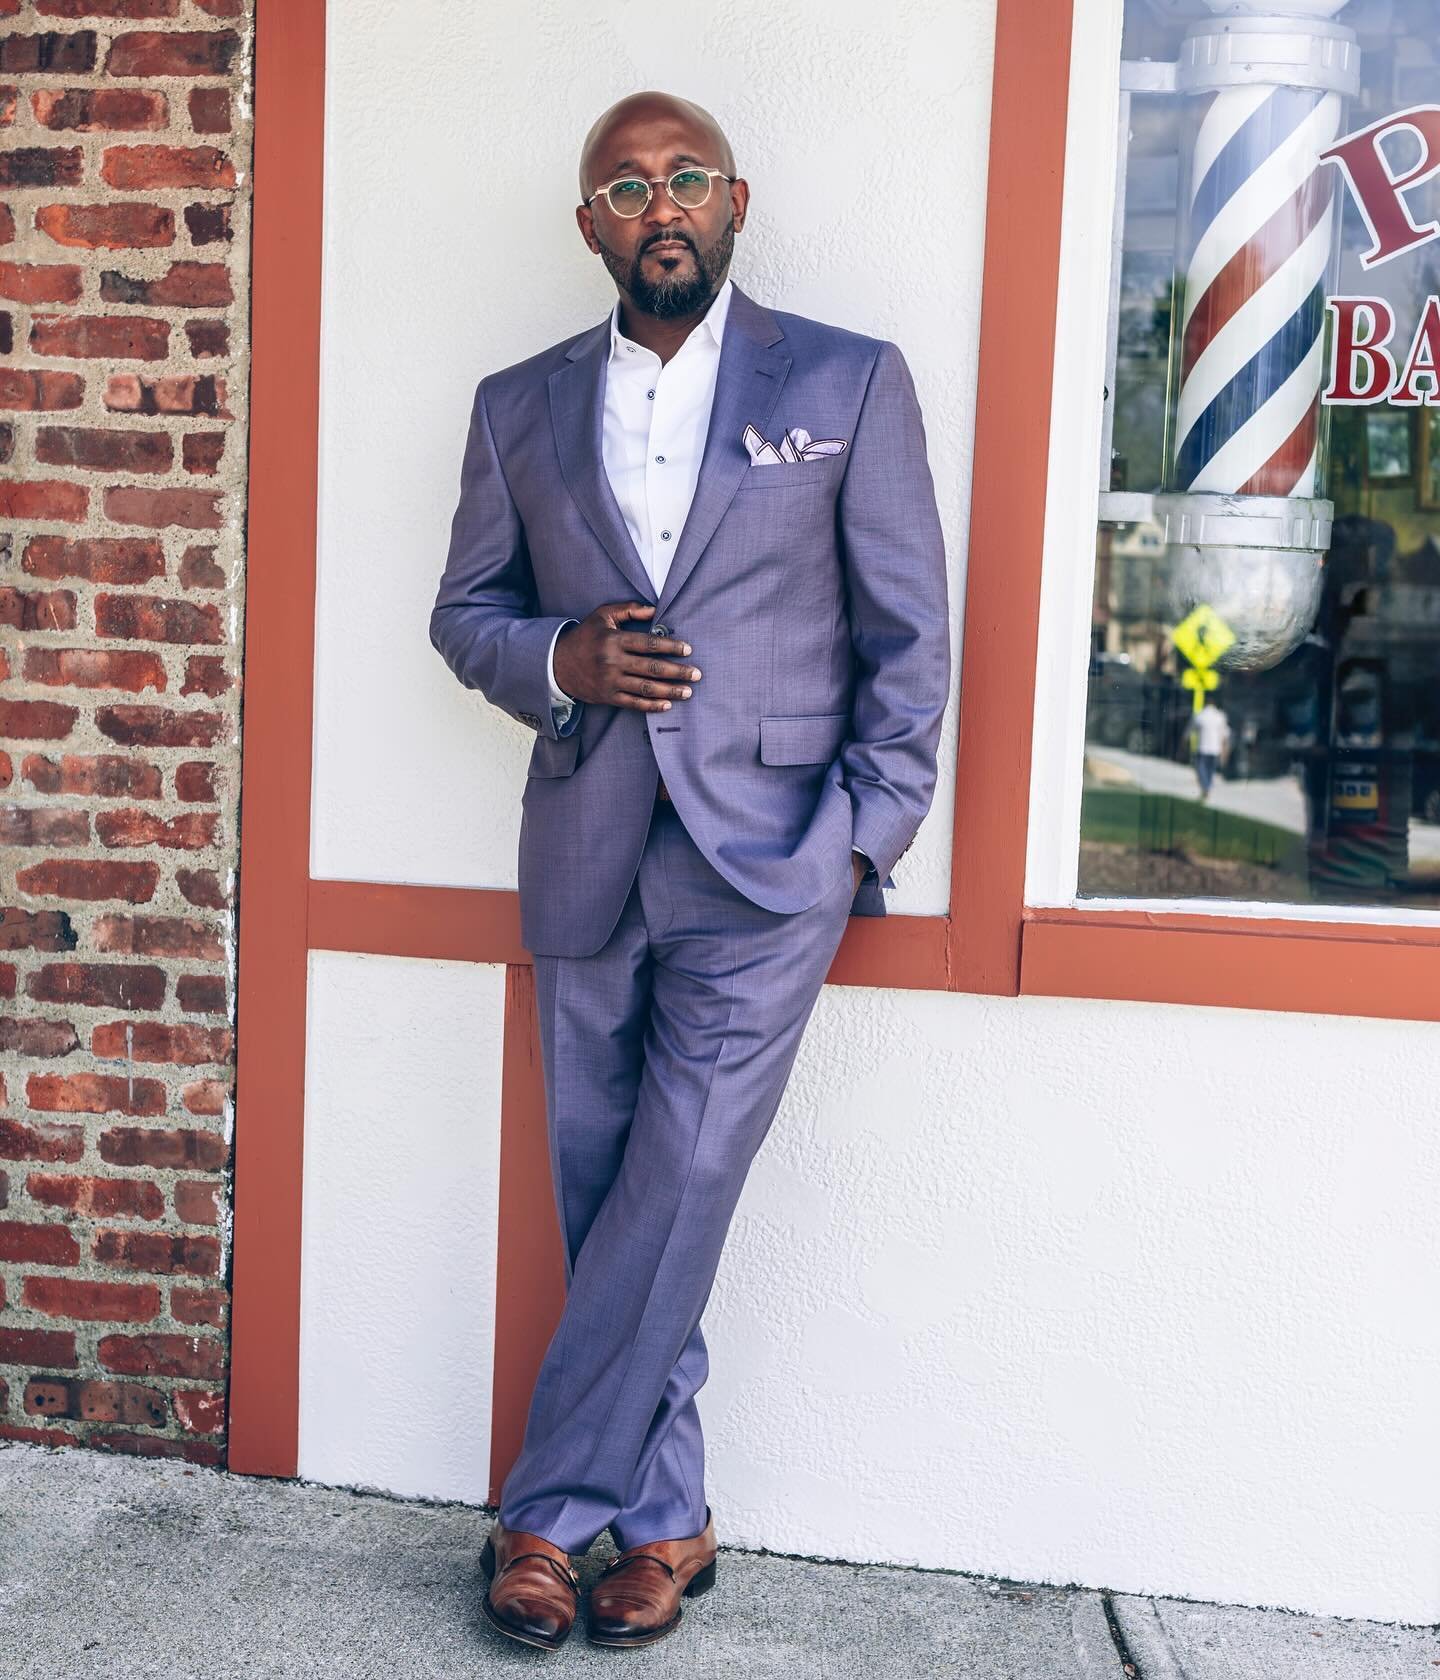 What better reason to wear color, than Spring? 

How to do it with this much effortless polish, you ask?

Let the color be the hero. 

Our lavender sharkskin only needed subtle accessorizing. 

White dress shirt with blue buttons
A lavender &amp; egg